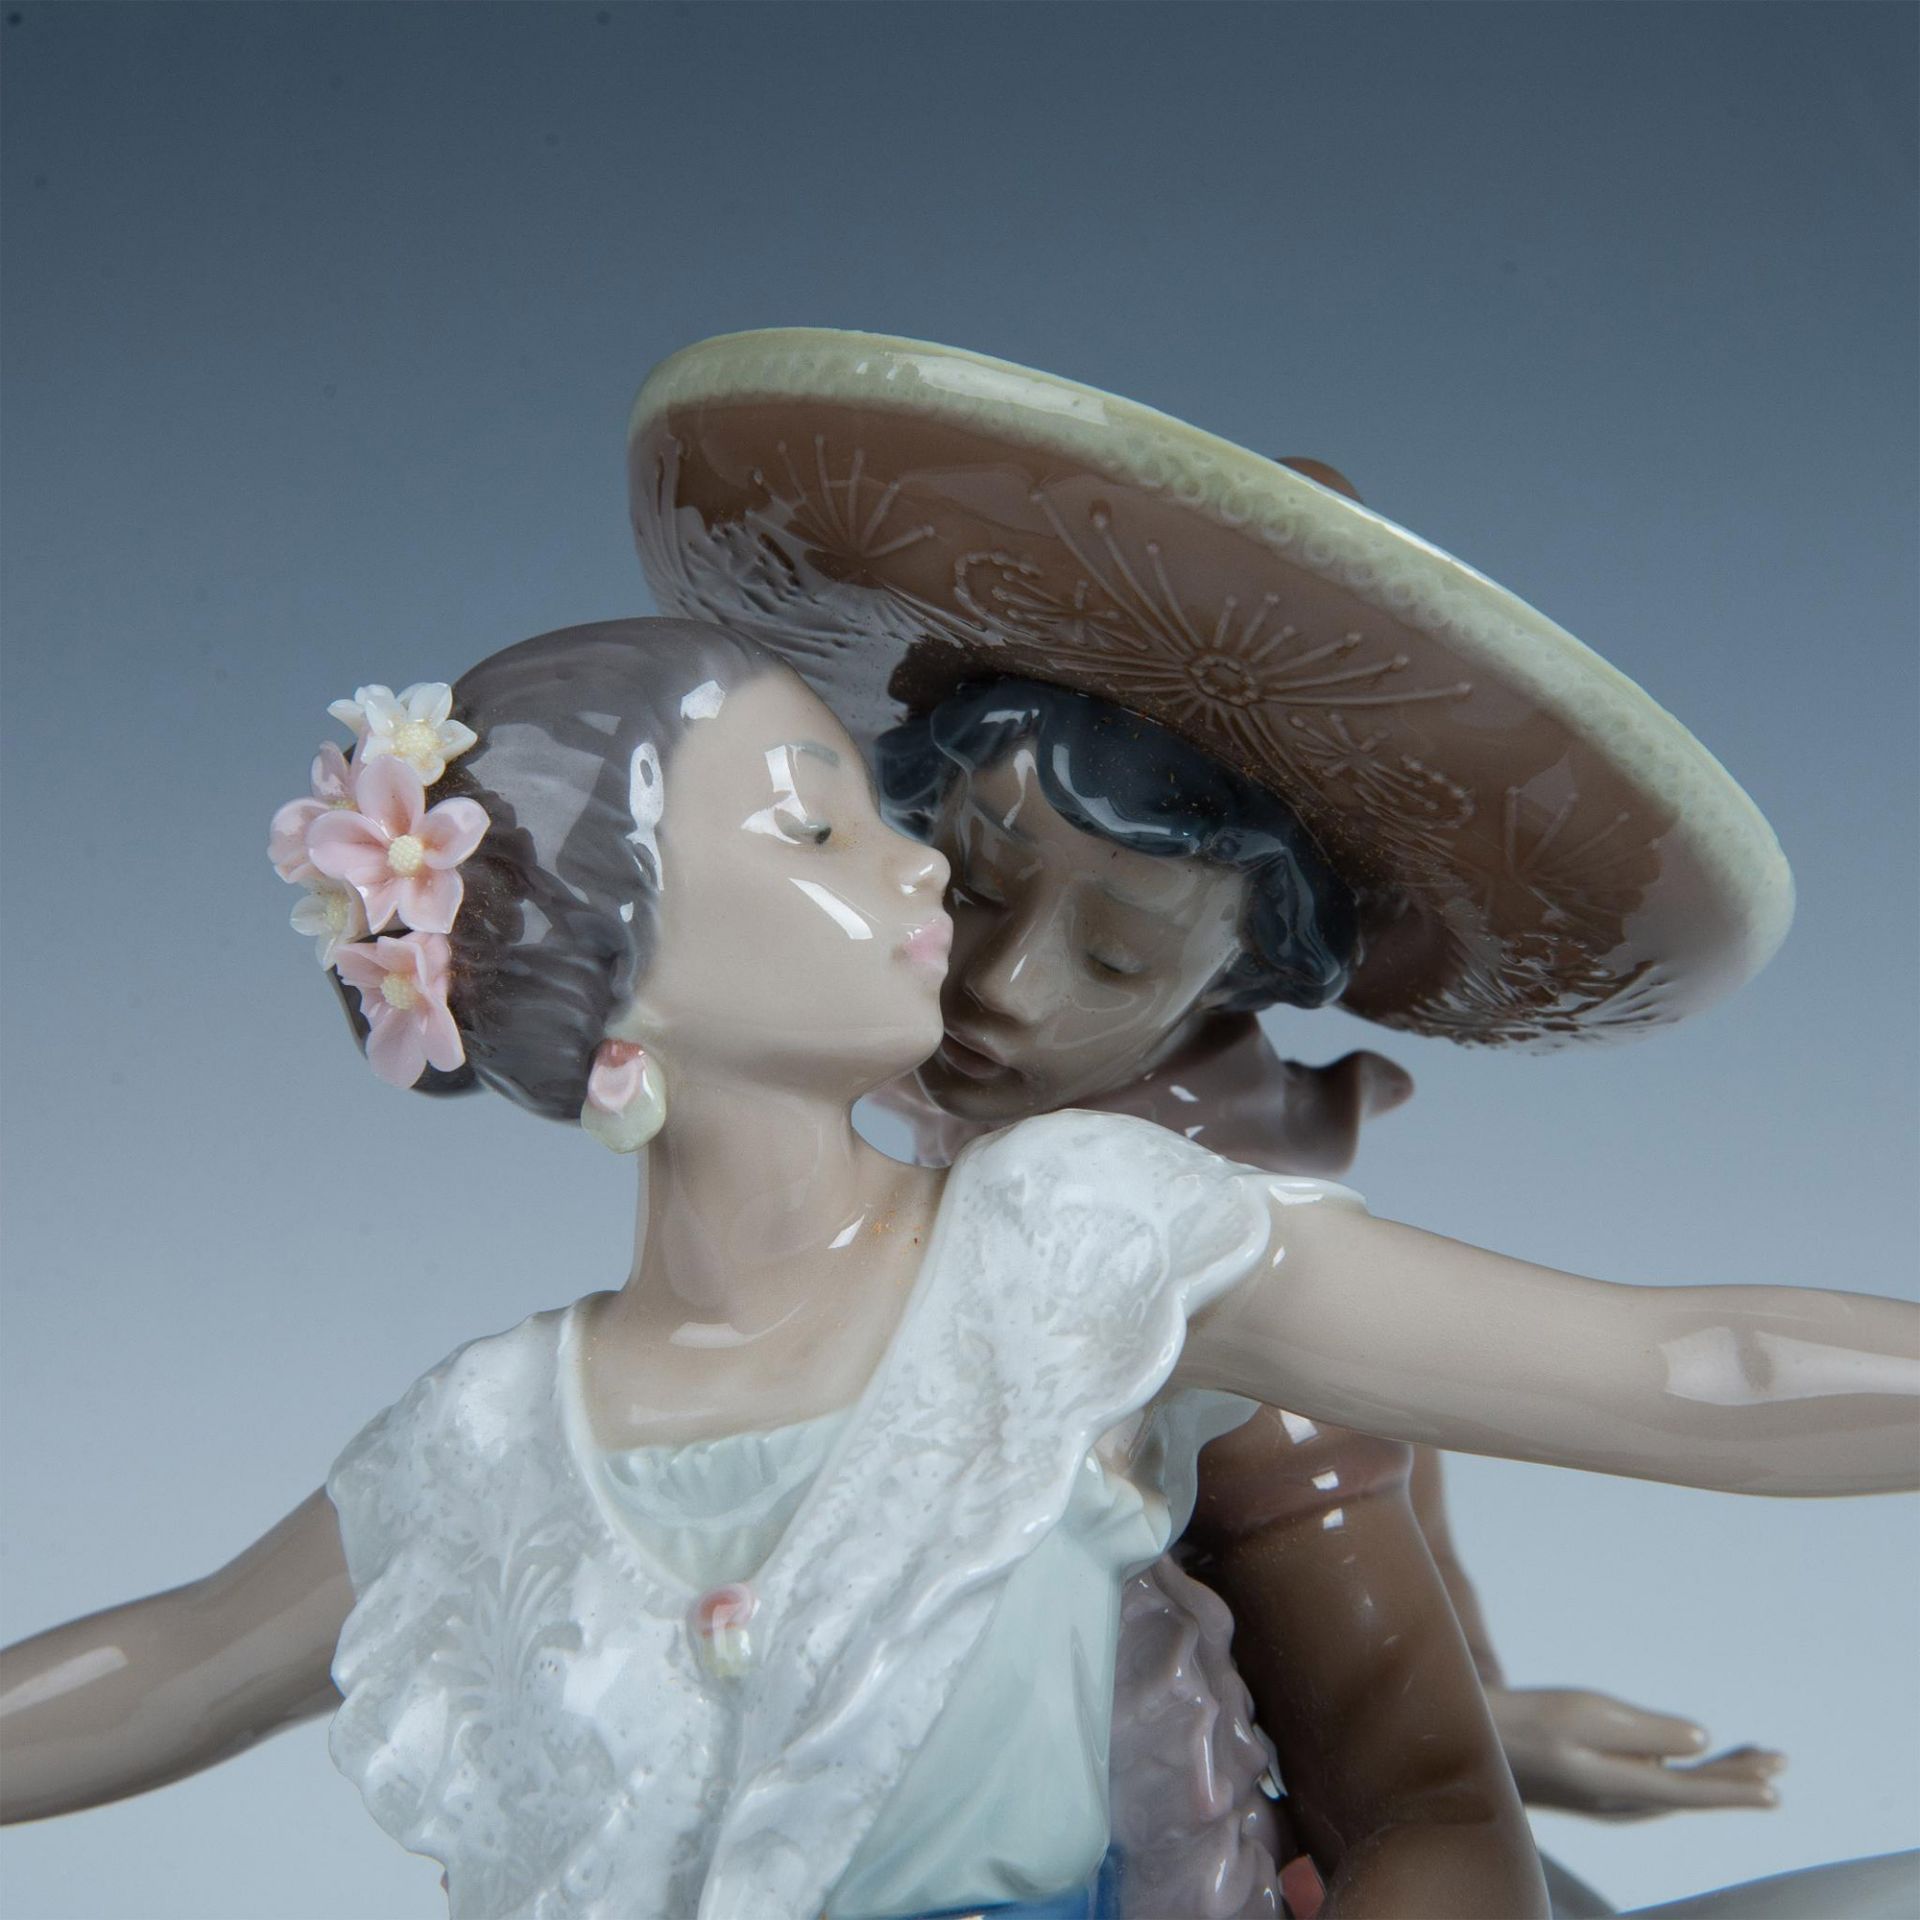 Mexican Dancers 1005415 - Lladro Porcelain Figurine - Image 2 of 8